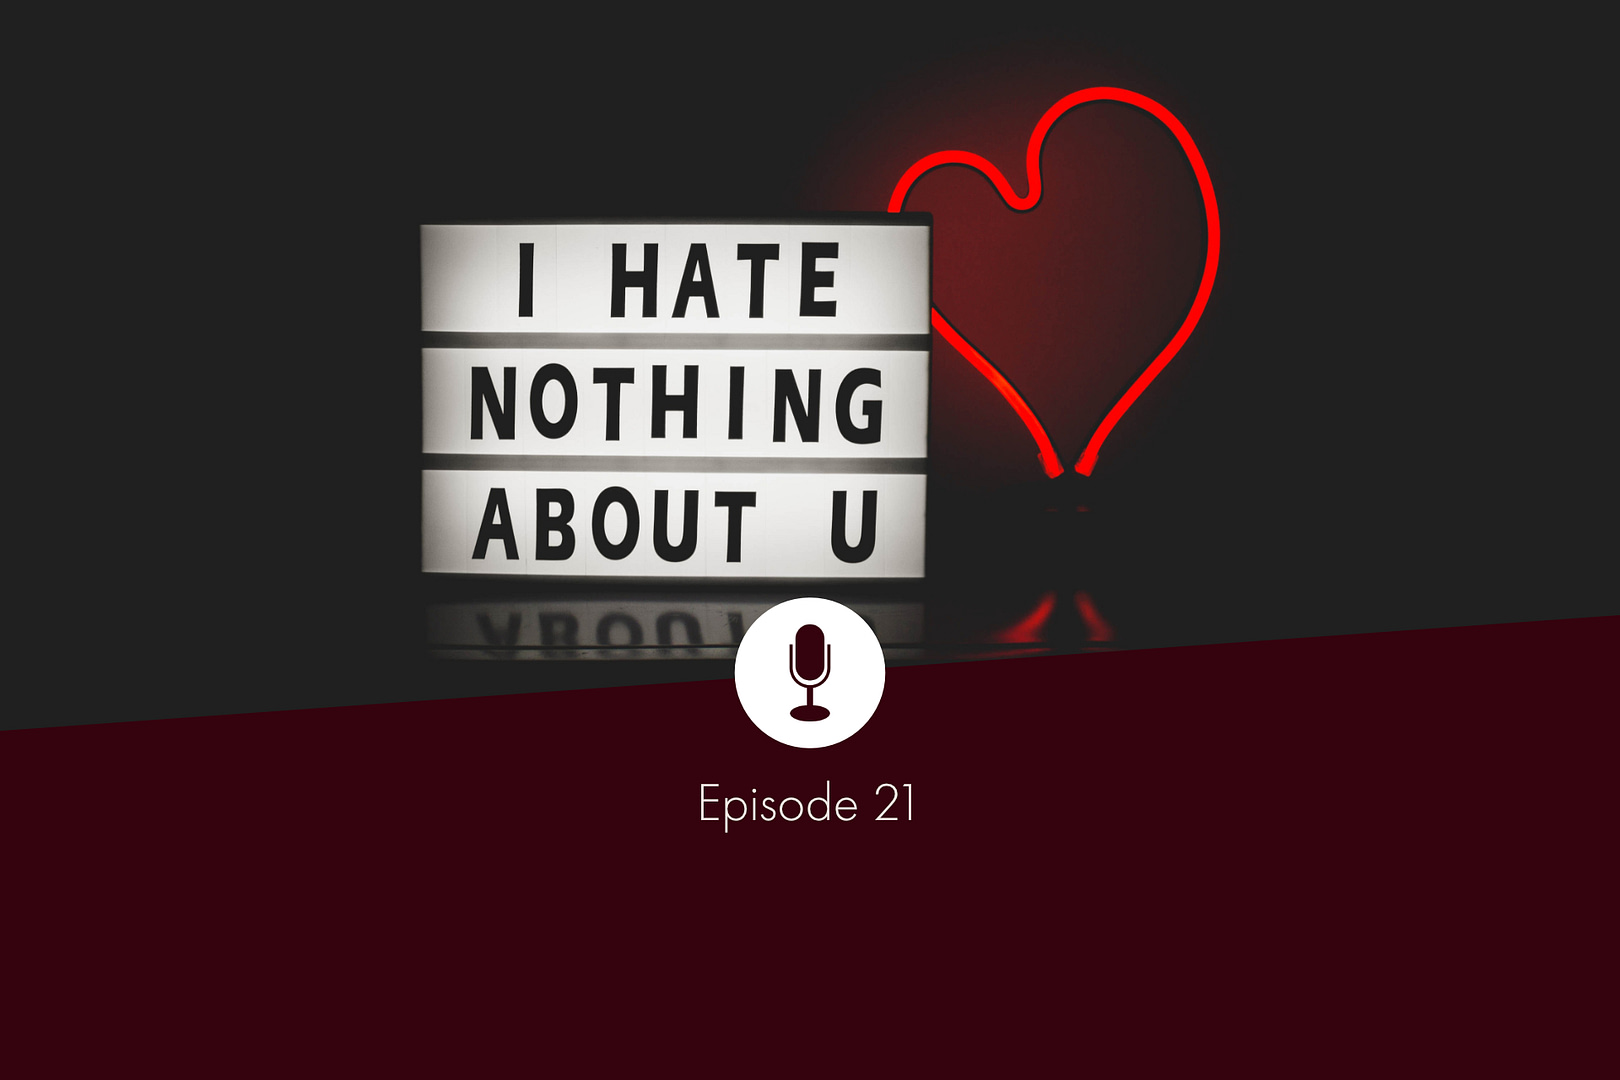 Illumninated text "I hate nothing about U" and a red, heart-shaped fluorescent tube